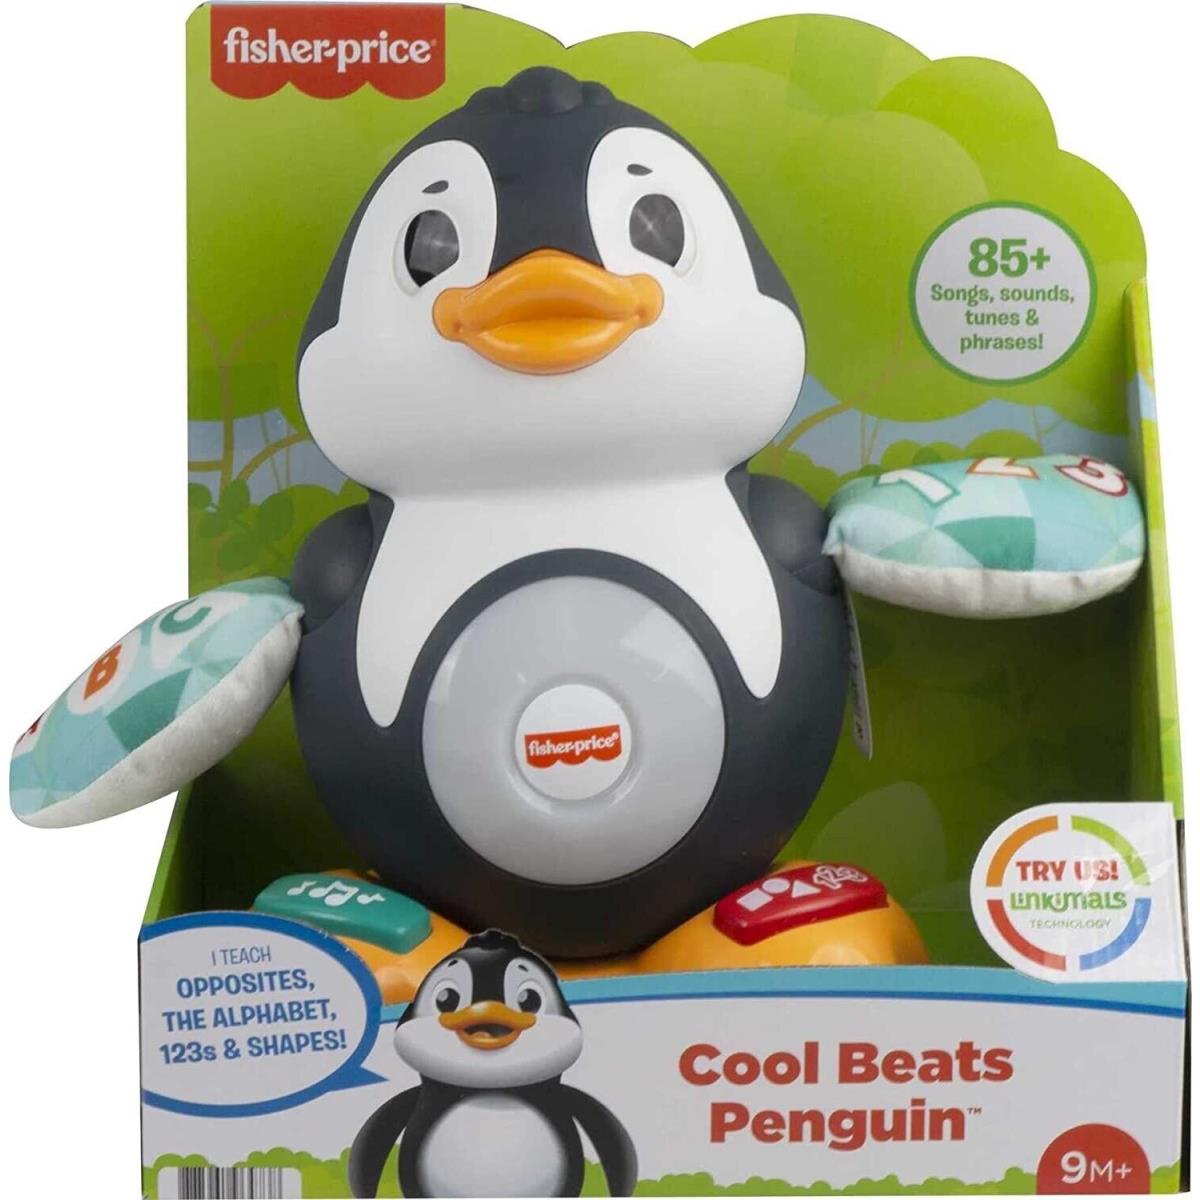 Linkimals Ccol Beats Penguin Musical Infant Toddler Toy with Sounds Gift For Kid